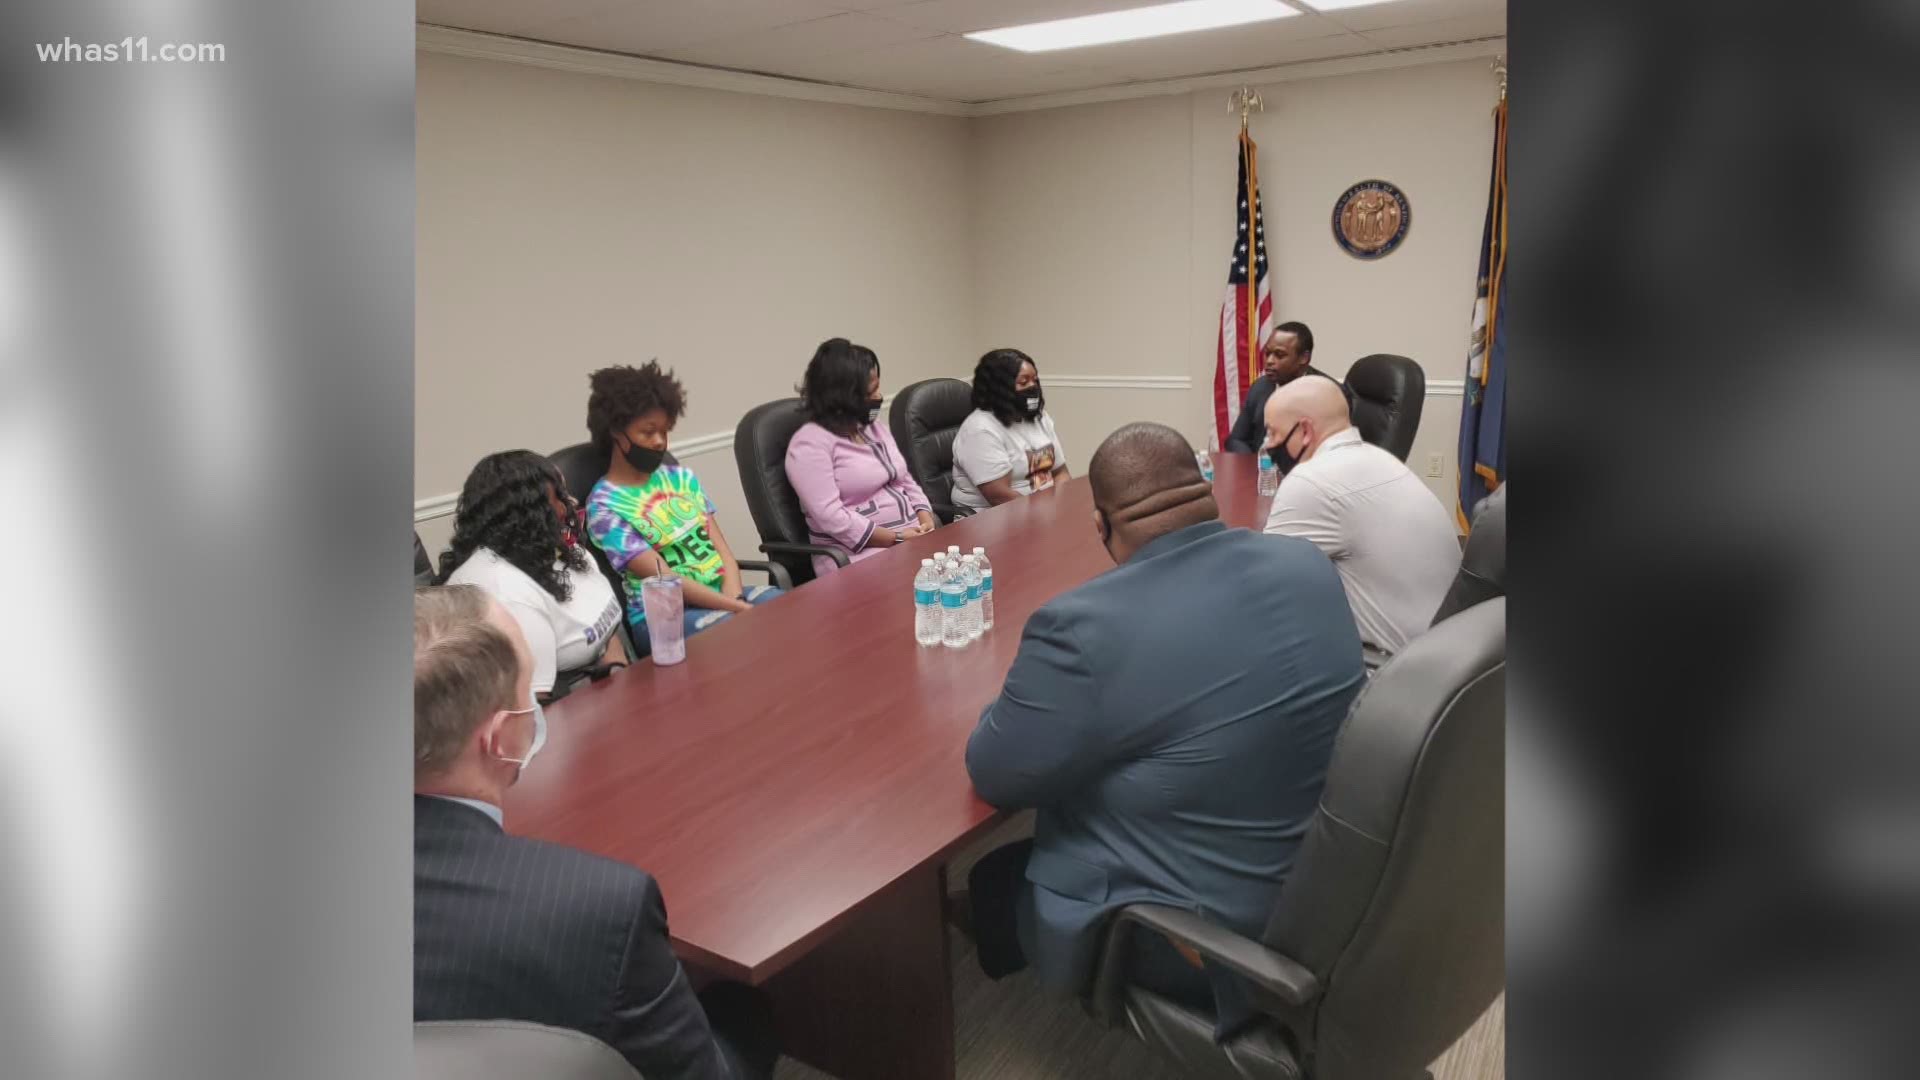 Cameron, who is investigating the deadly police shooting, talked with Breonna's mother, sister, aunt and family attorneys personally expressing his condolences.